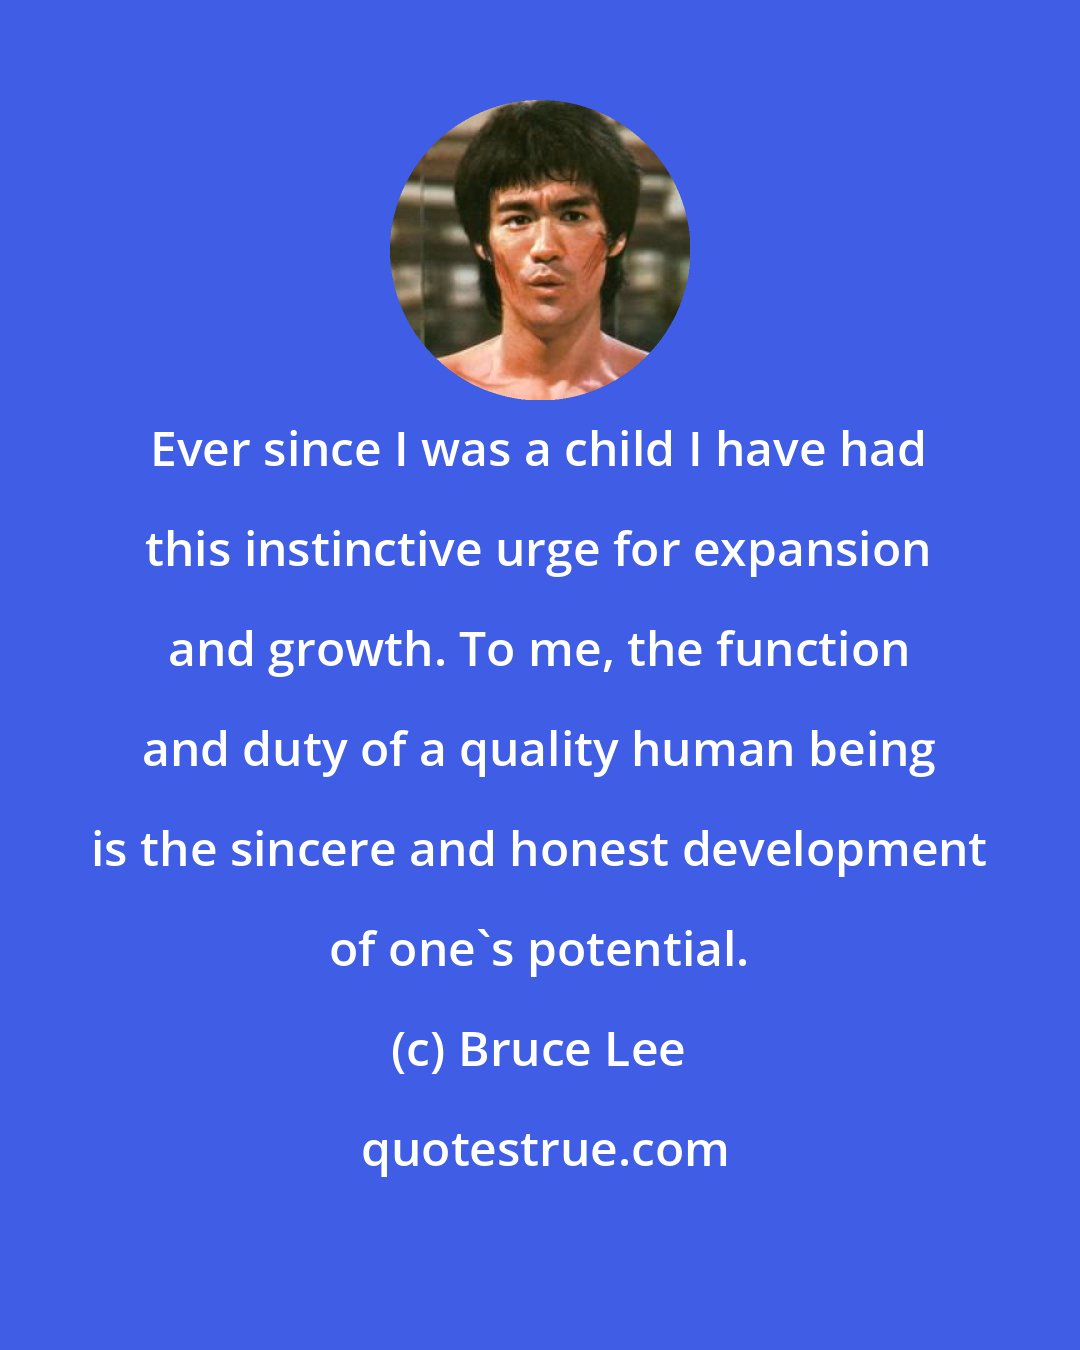 Bruce Lee: Ever since I was a child I have had this instinctive urge for expansion and growth. To me, the function and duty of a quality human being is the sincere and honest development of one's potential.